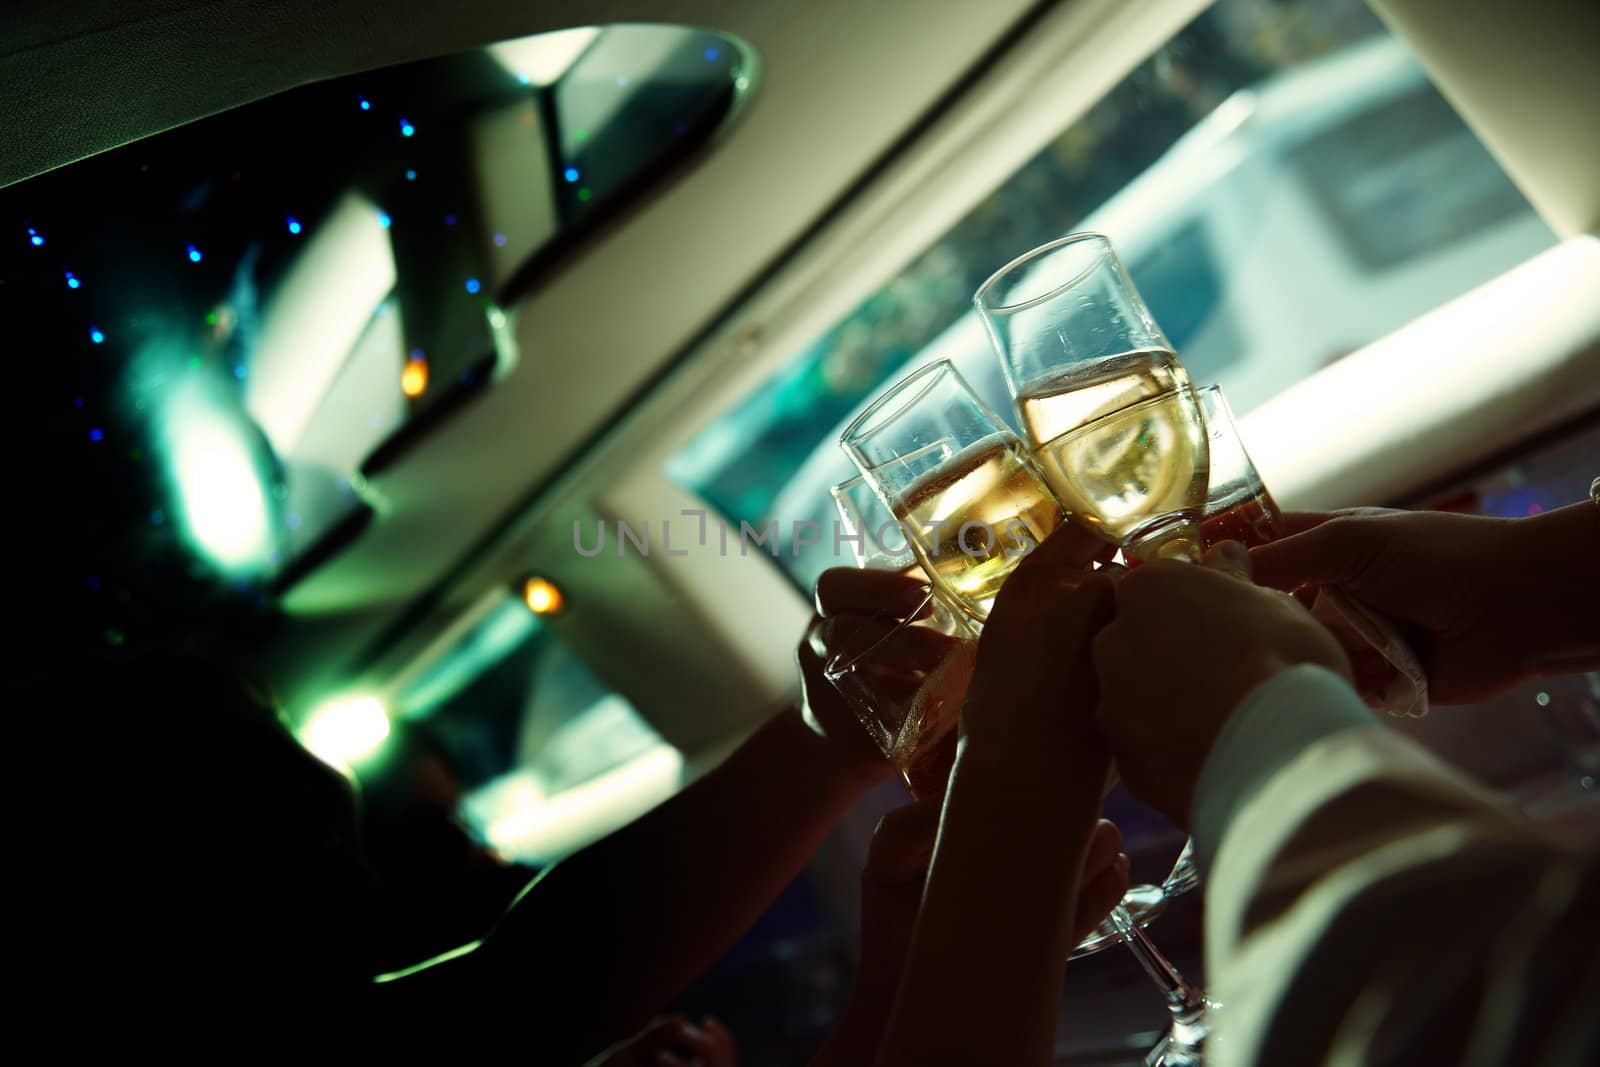 Chin-chin in the limousine by Novic